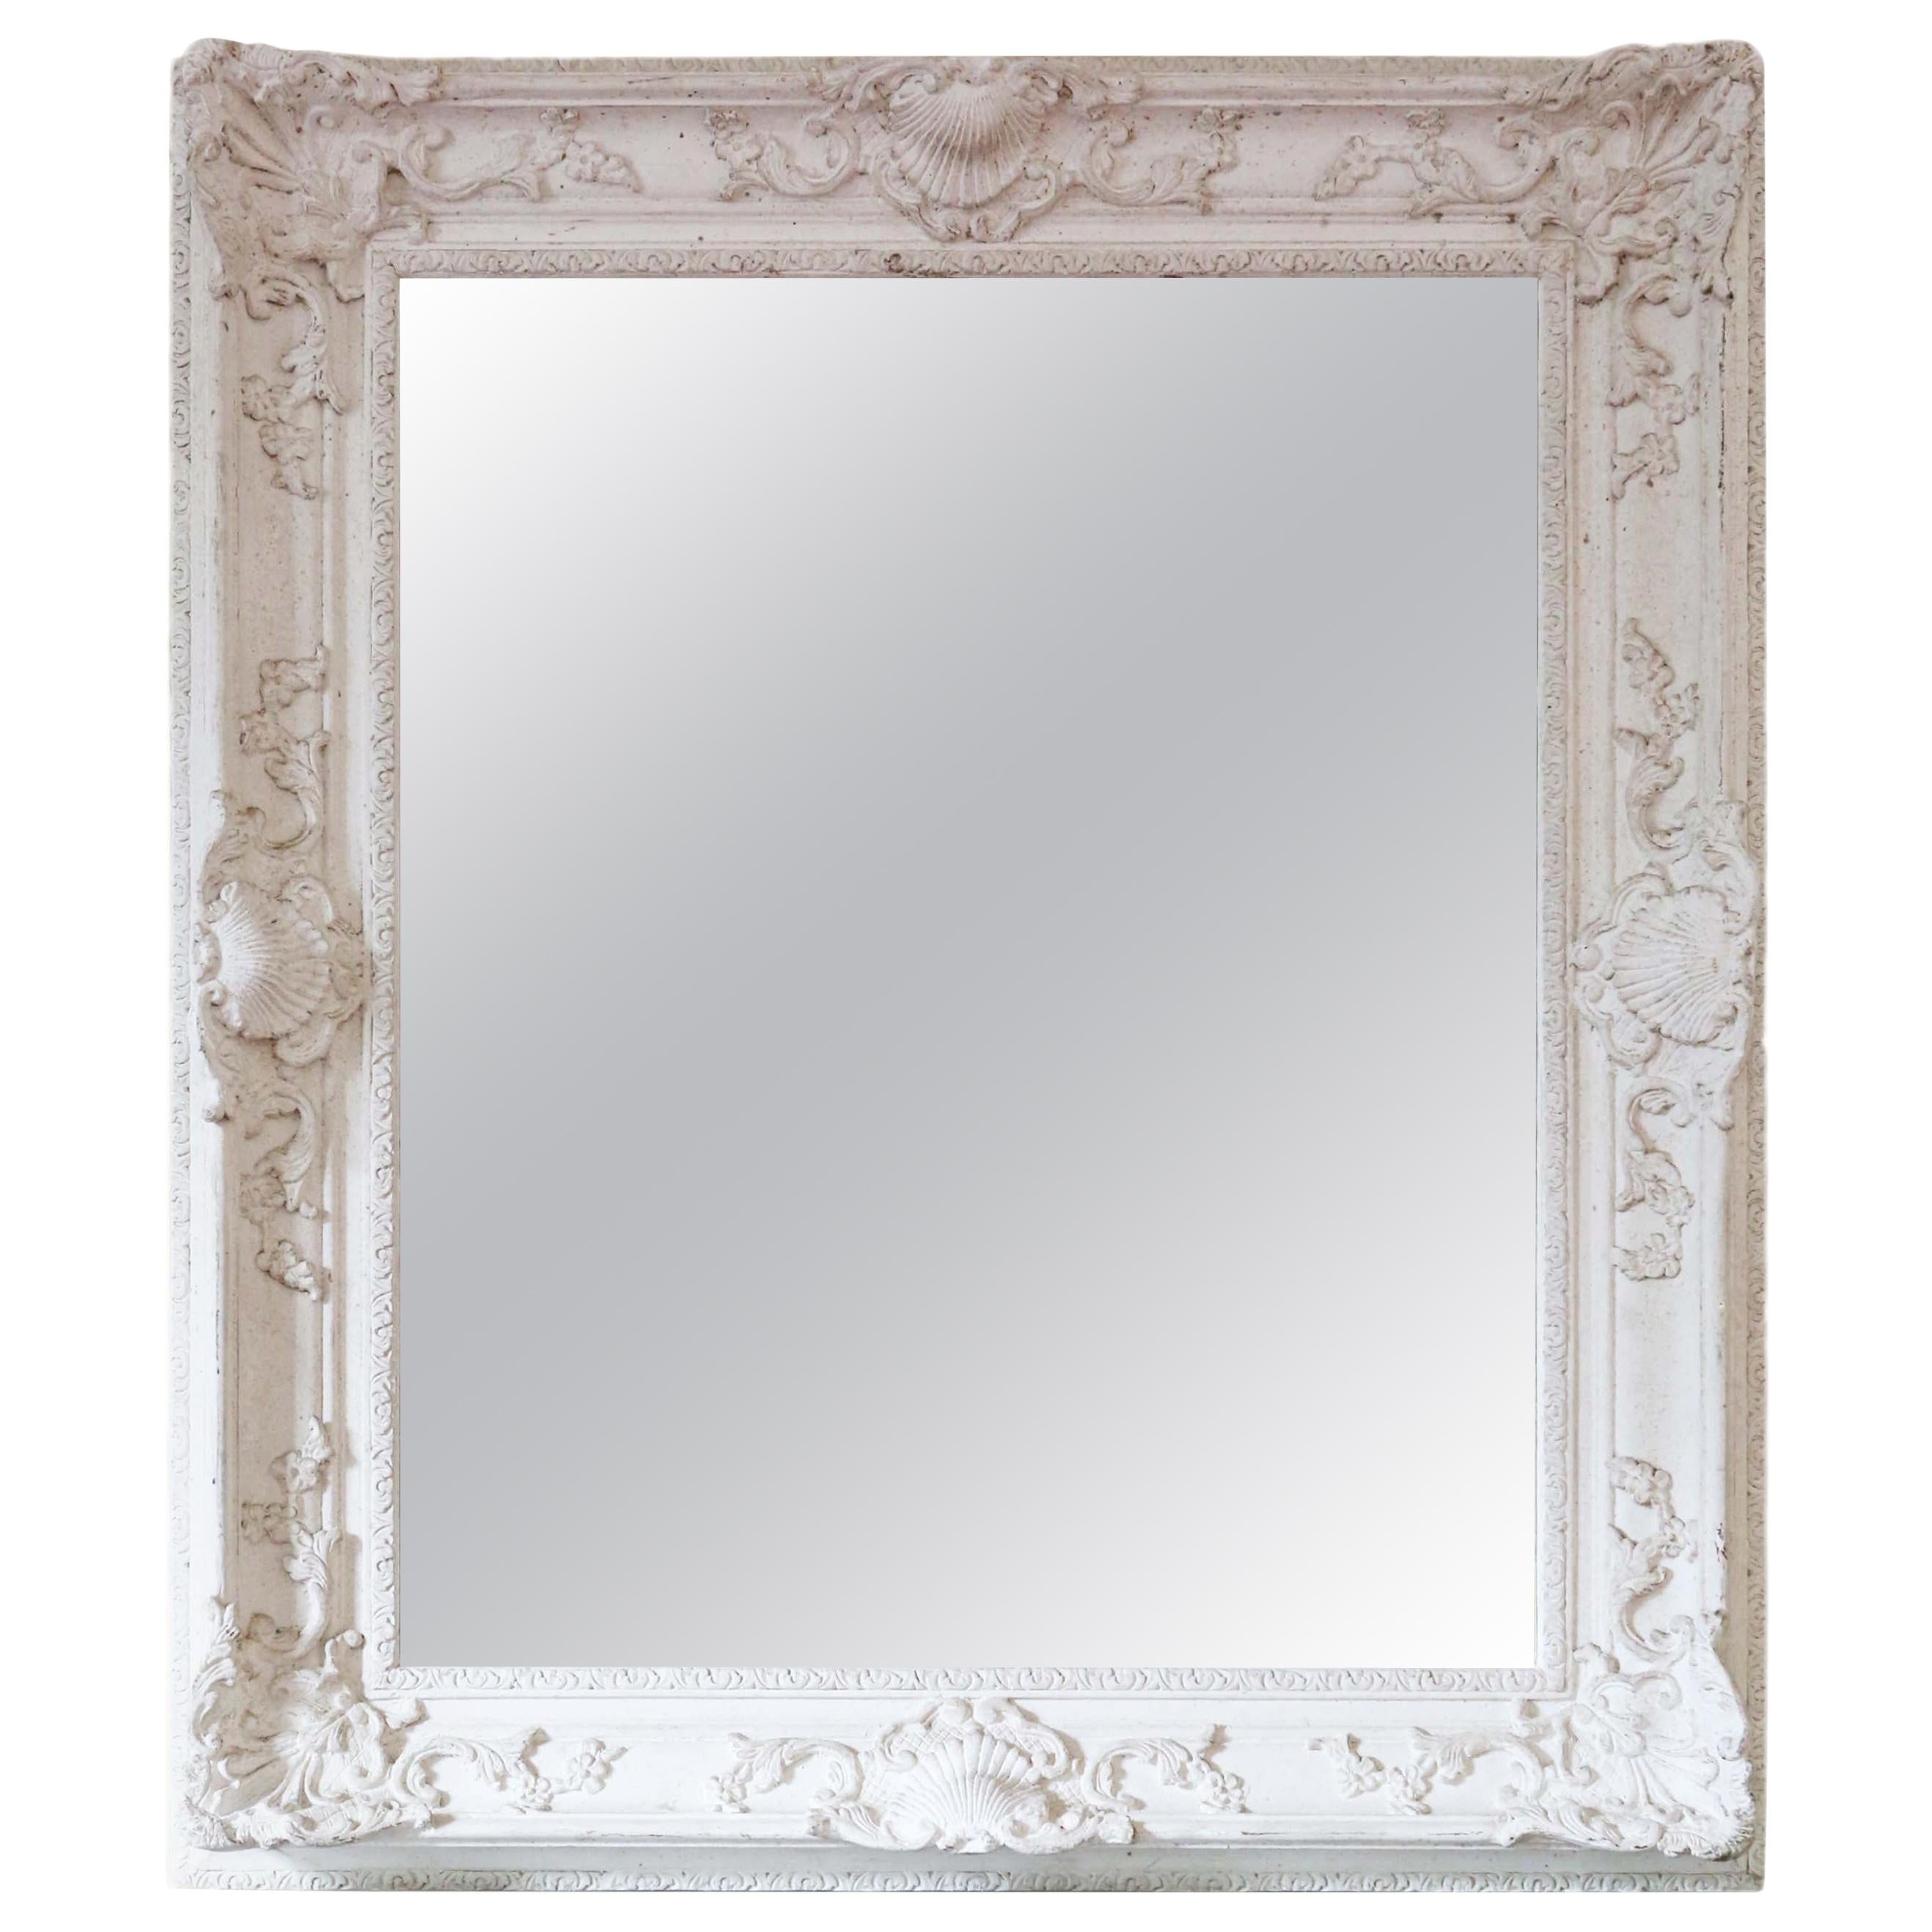 Antique Large Natural Gesso Overmantle or Wall Mirror, Mid 20th Century For Sale